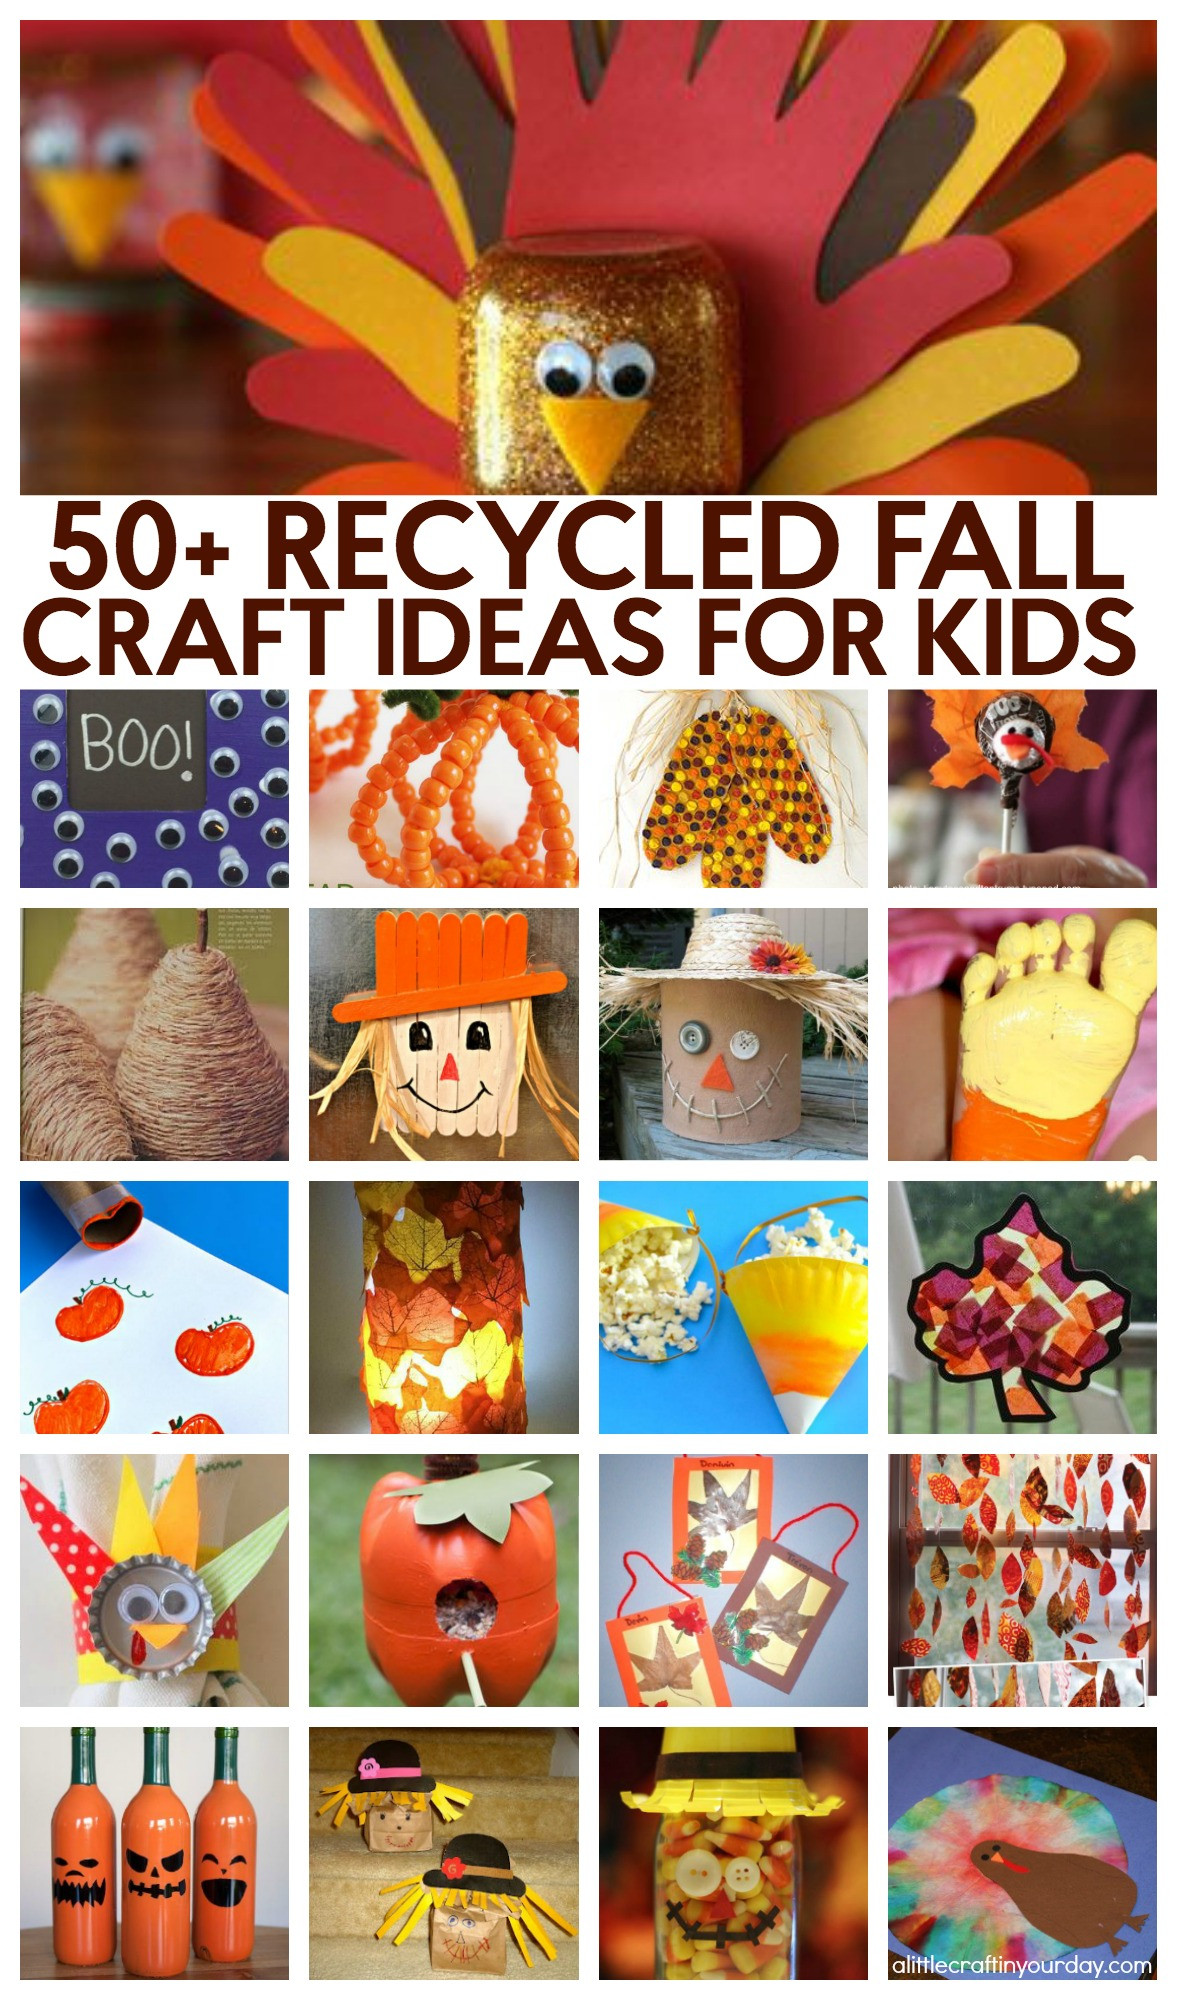 Craft Project For Toddler
 51 Recycled Fall Kids Crafts A Little Craft In Your DayA